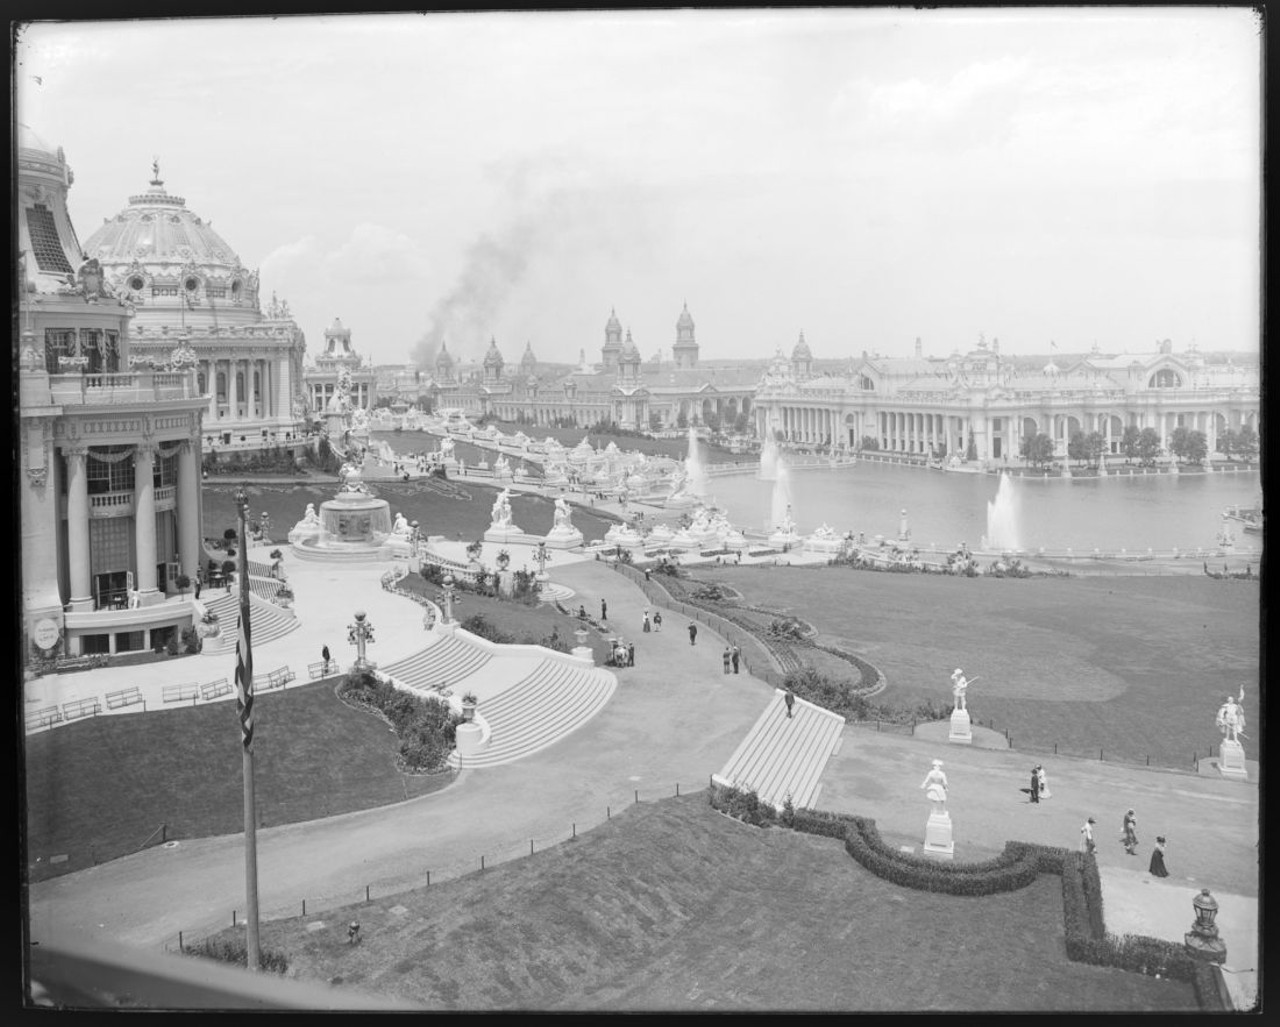 1904 WORLD'S FAIR VIEW OF FAIR LOOKING WEST FROM RESTAURANT PAVILION. Horizontal, black and white image showing the view from the German building with the east restaurant pavilion in left foreground, the Festival hall in left center, the Palace of Electricity at right center and the Palace of Machinery in center background.
Find out more about this photo at MoHistory.org.